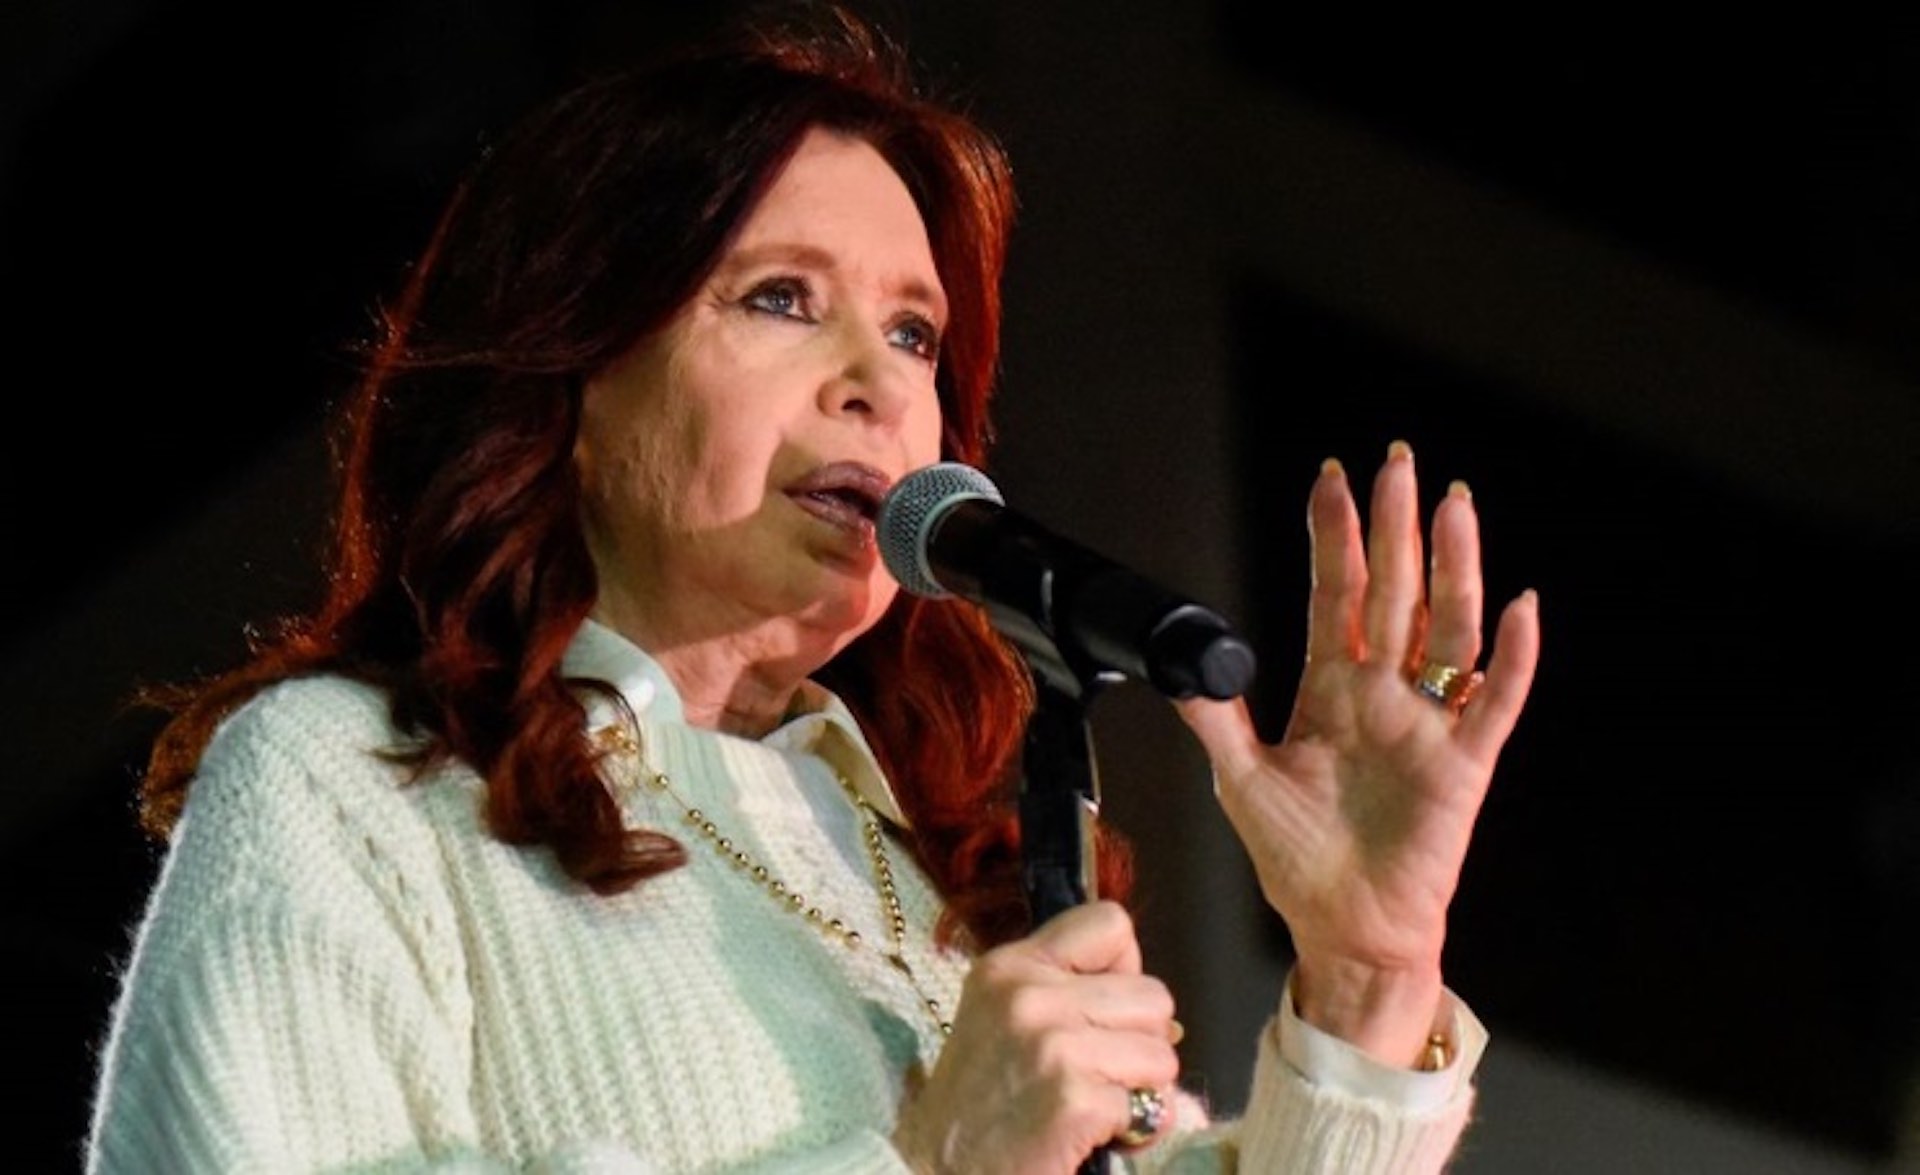 Argentinian vice president Kirchner unharmed in point-blank shooting attempt